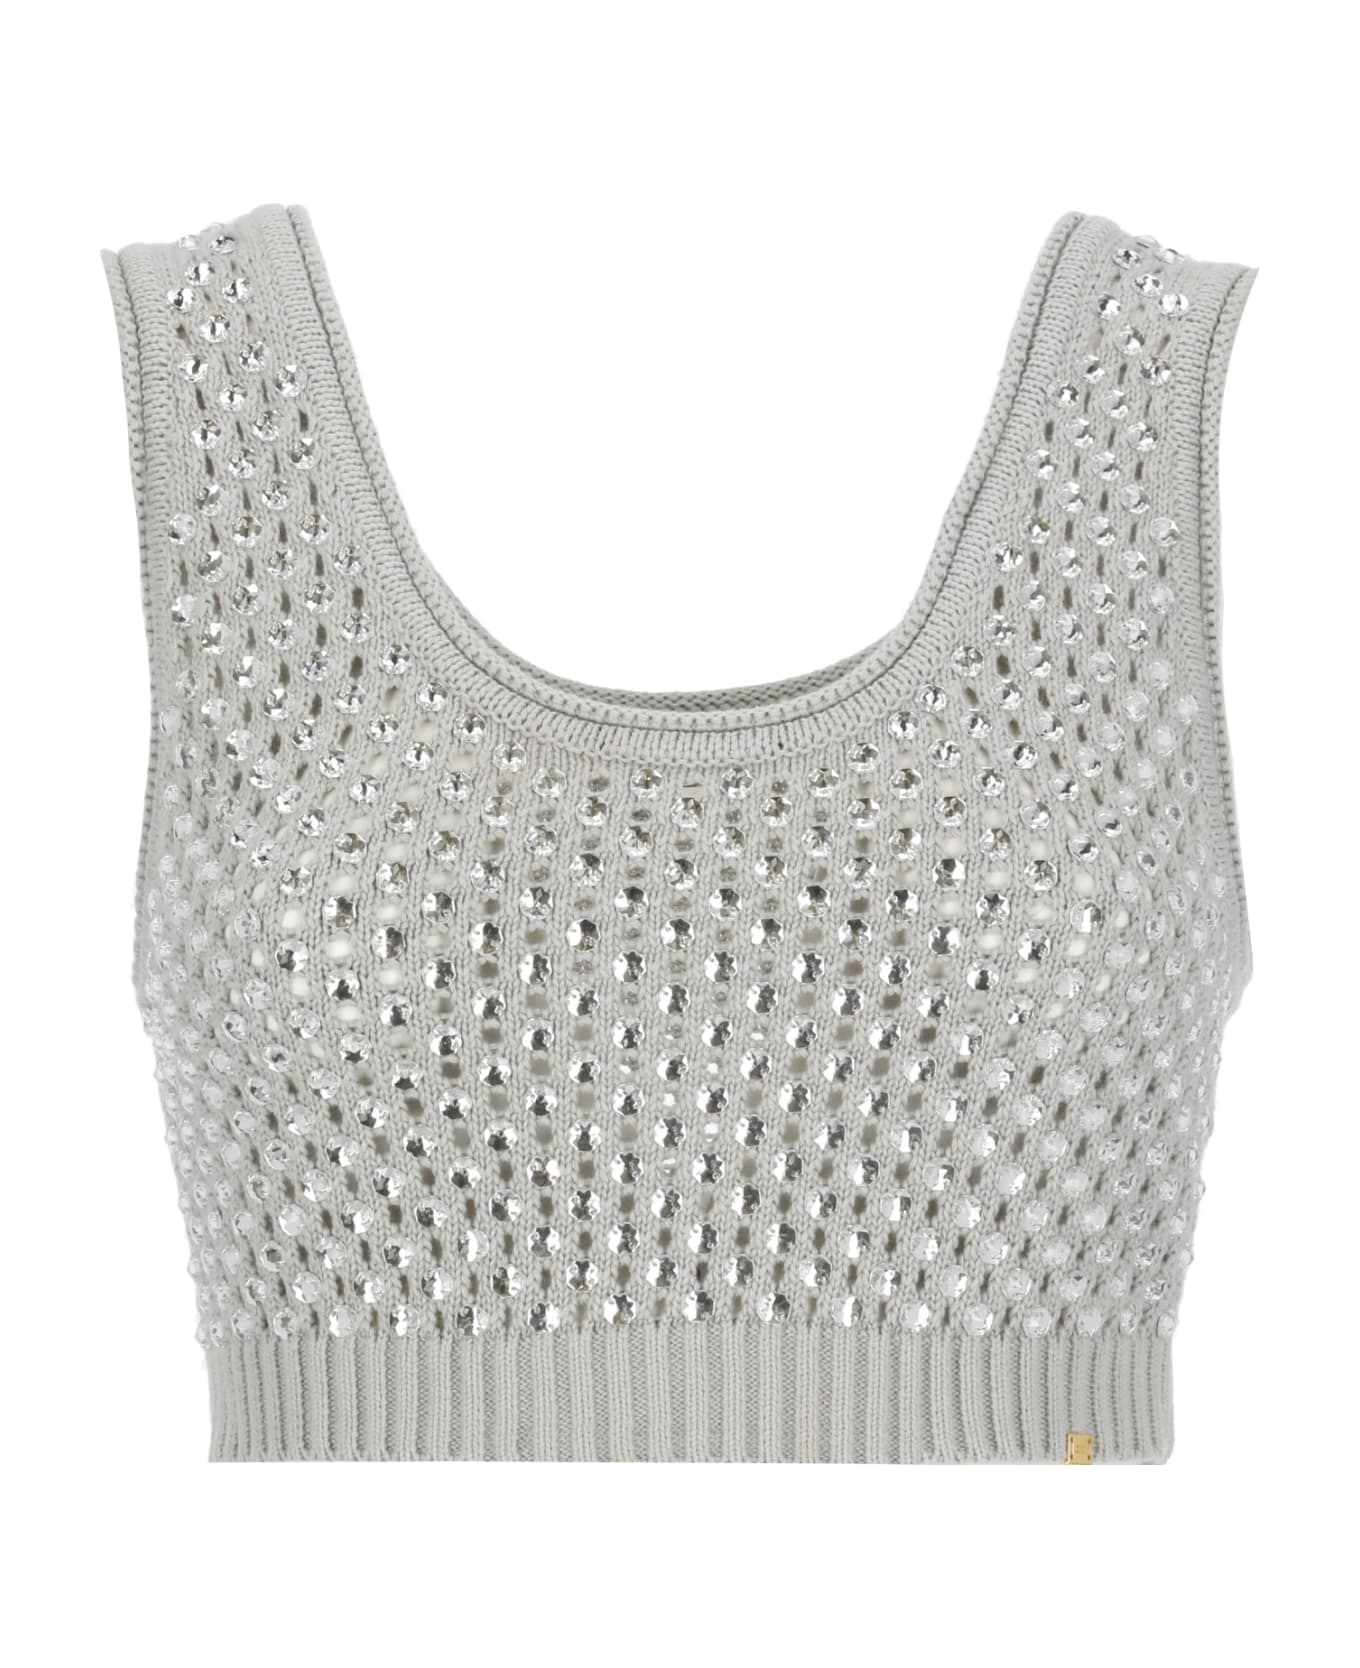 Elisabetta Franchi Knitted Top With Strass - Grey タンクトップ